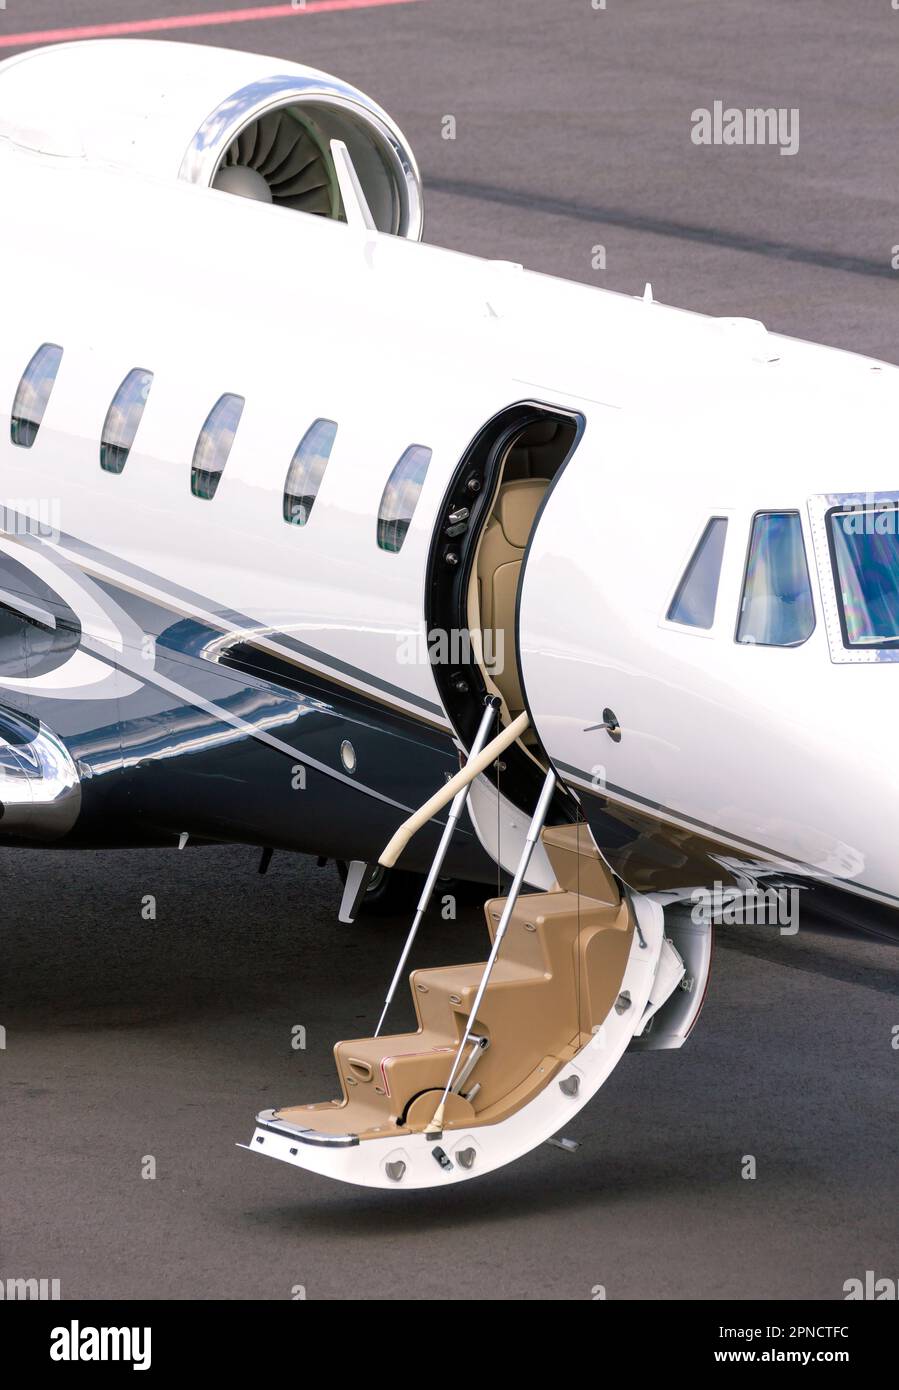 Modern corporate business jet on the tarmac of an airport. Stock Photo